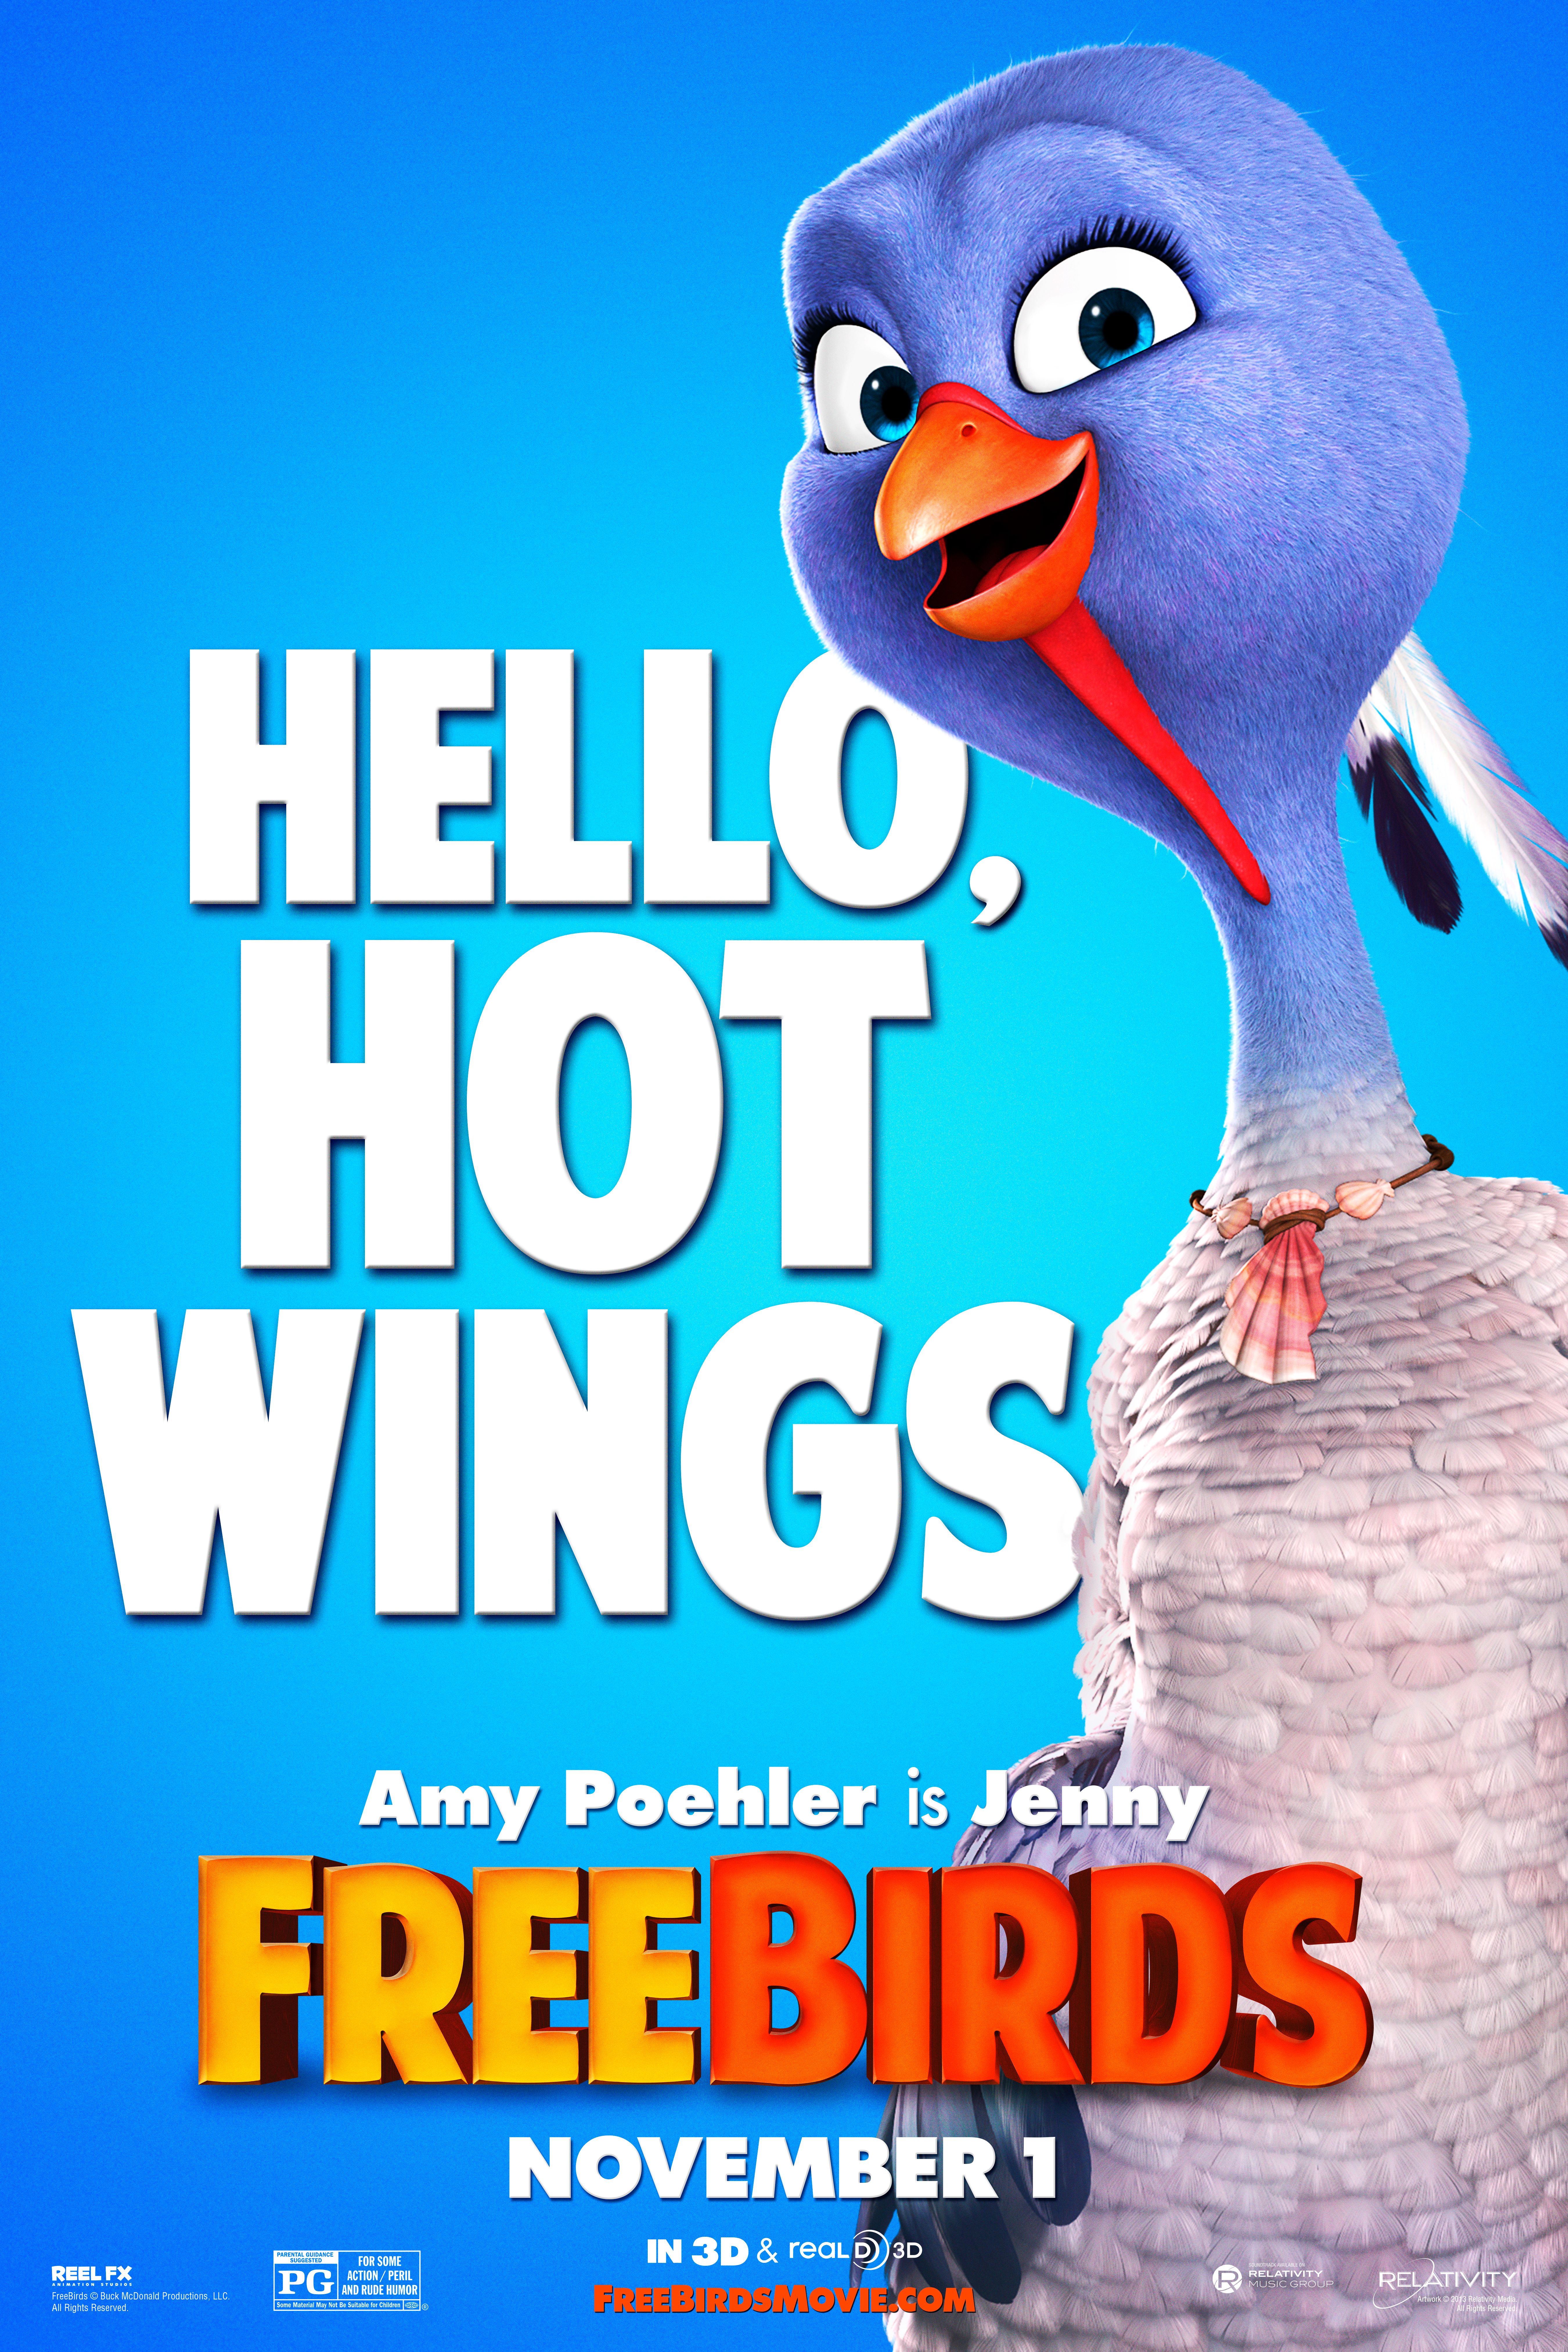 Free Birds Character Poster 3